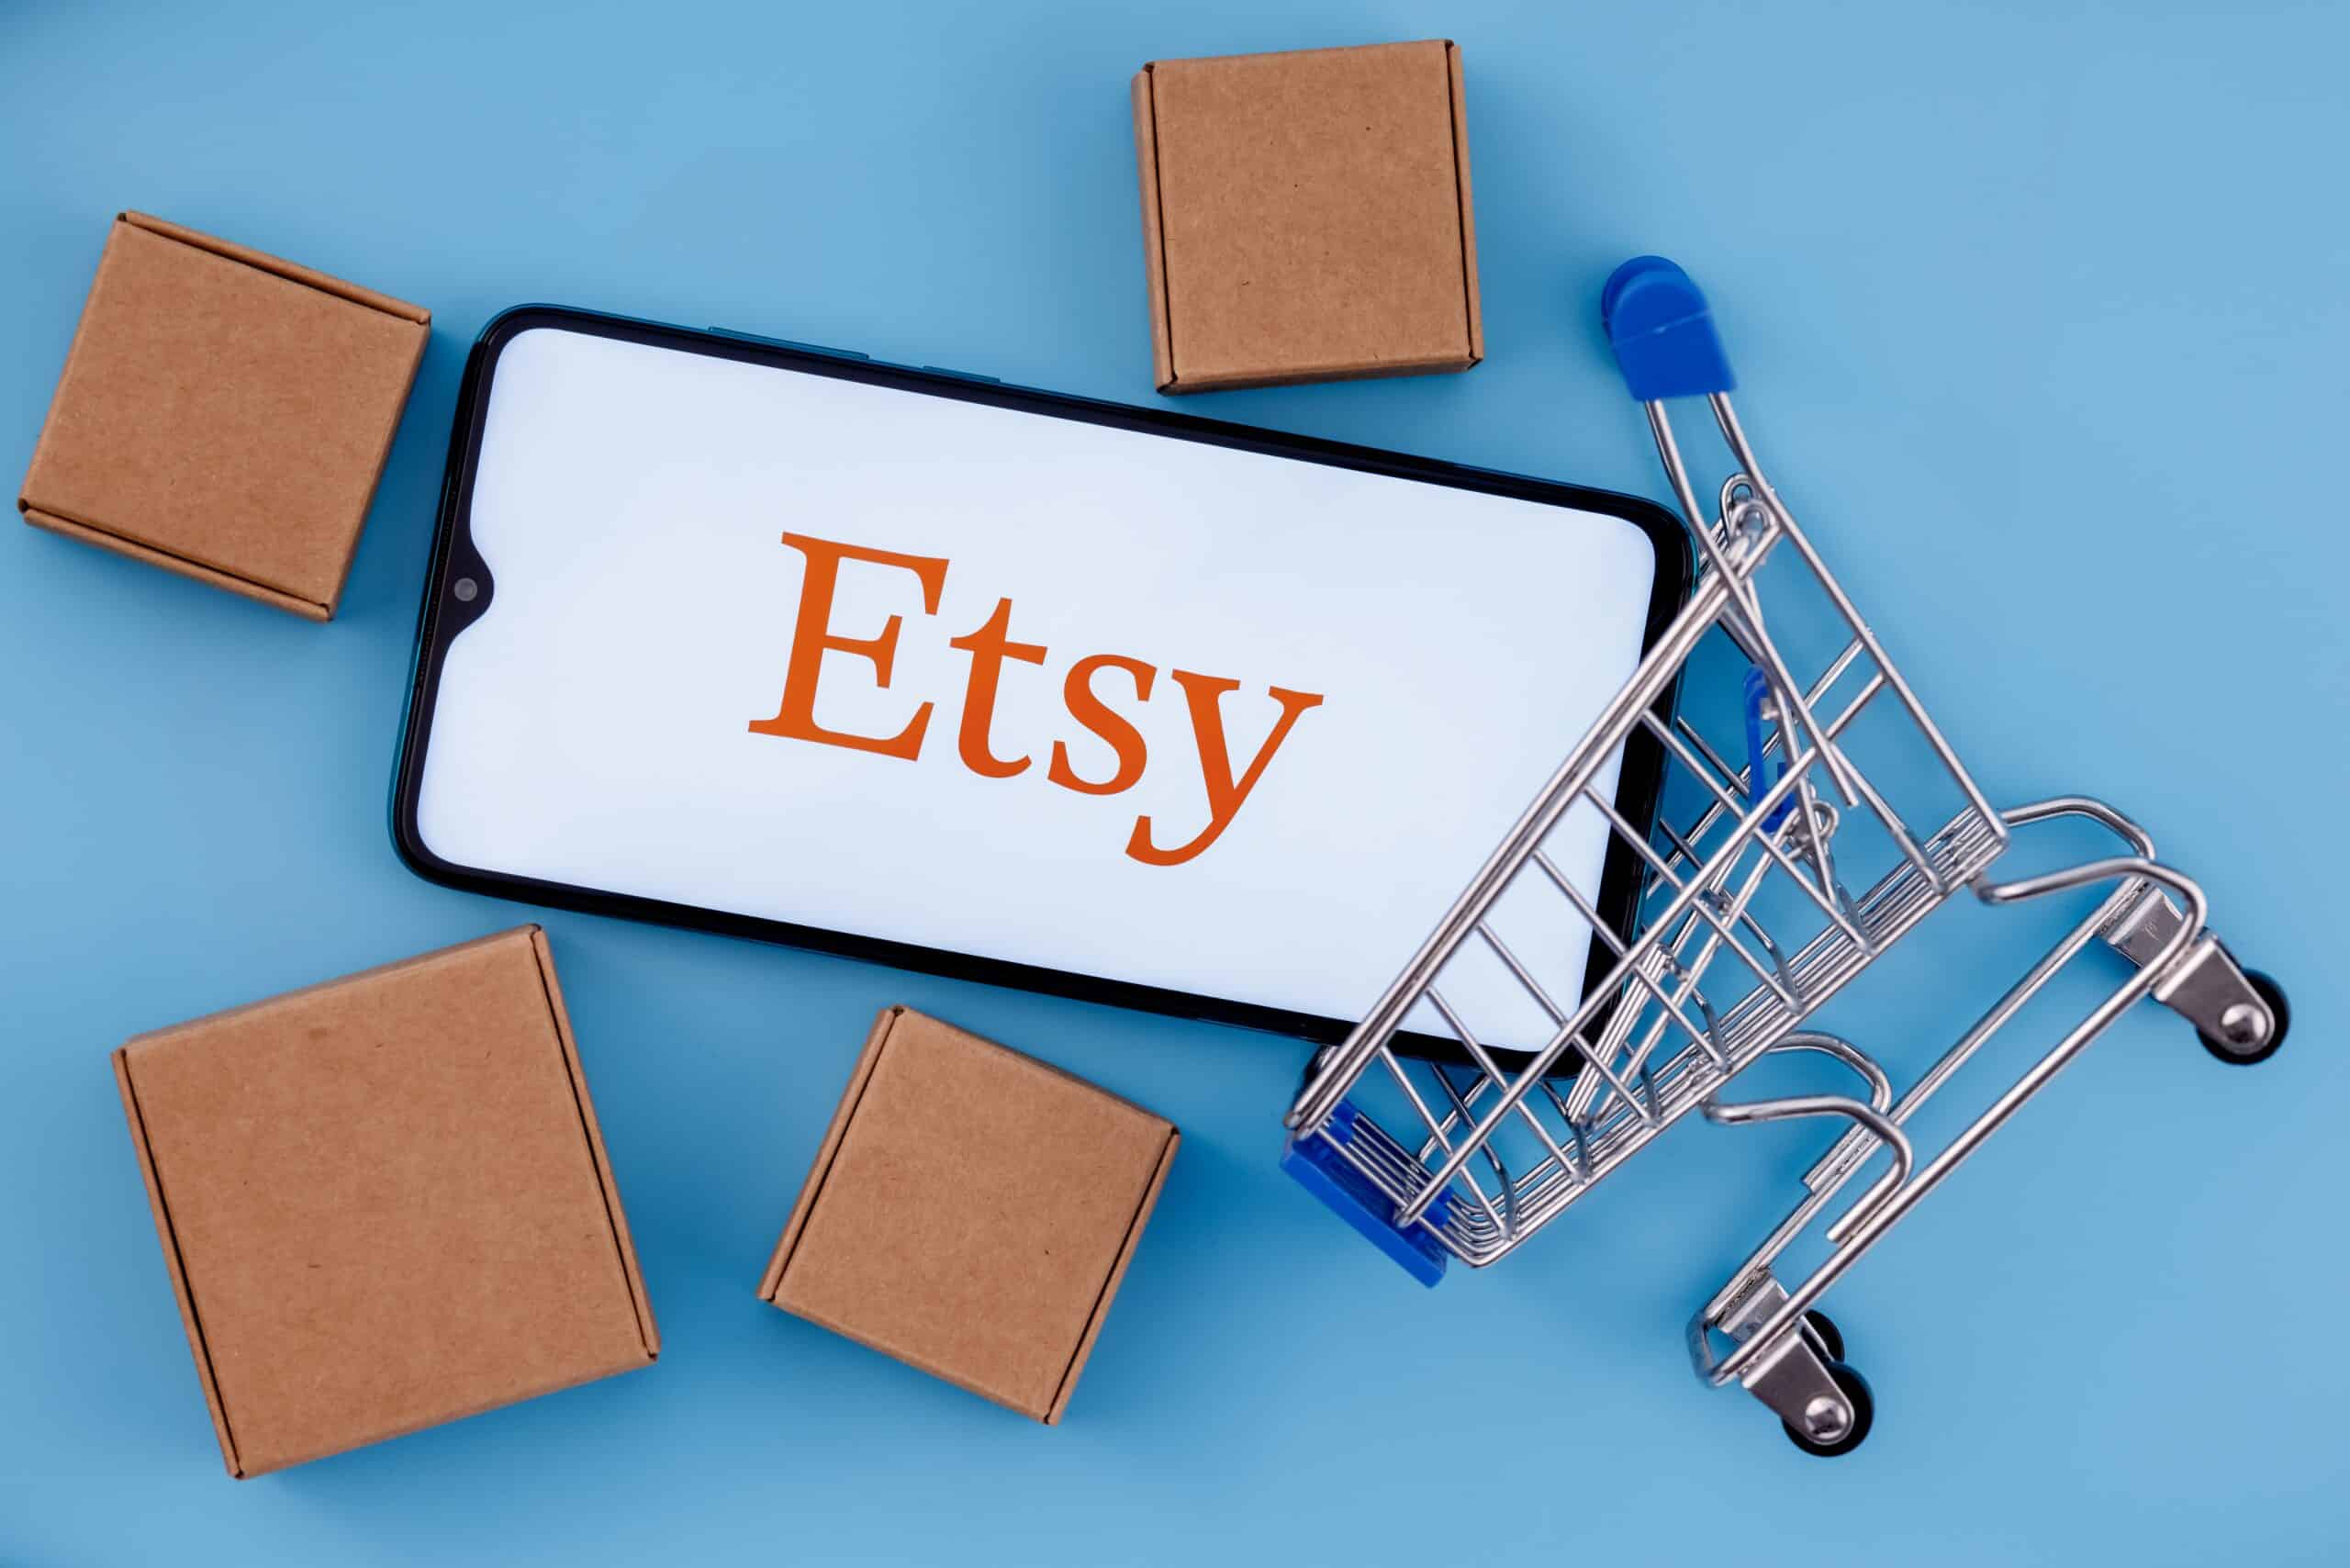 How To Get Traffic To Your Etsy Shop